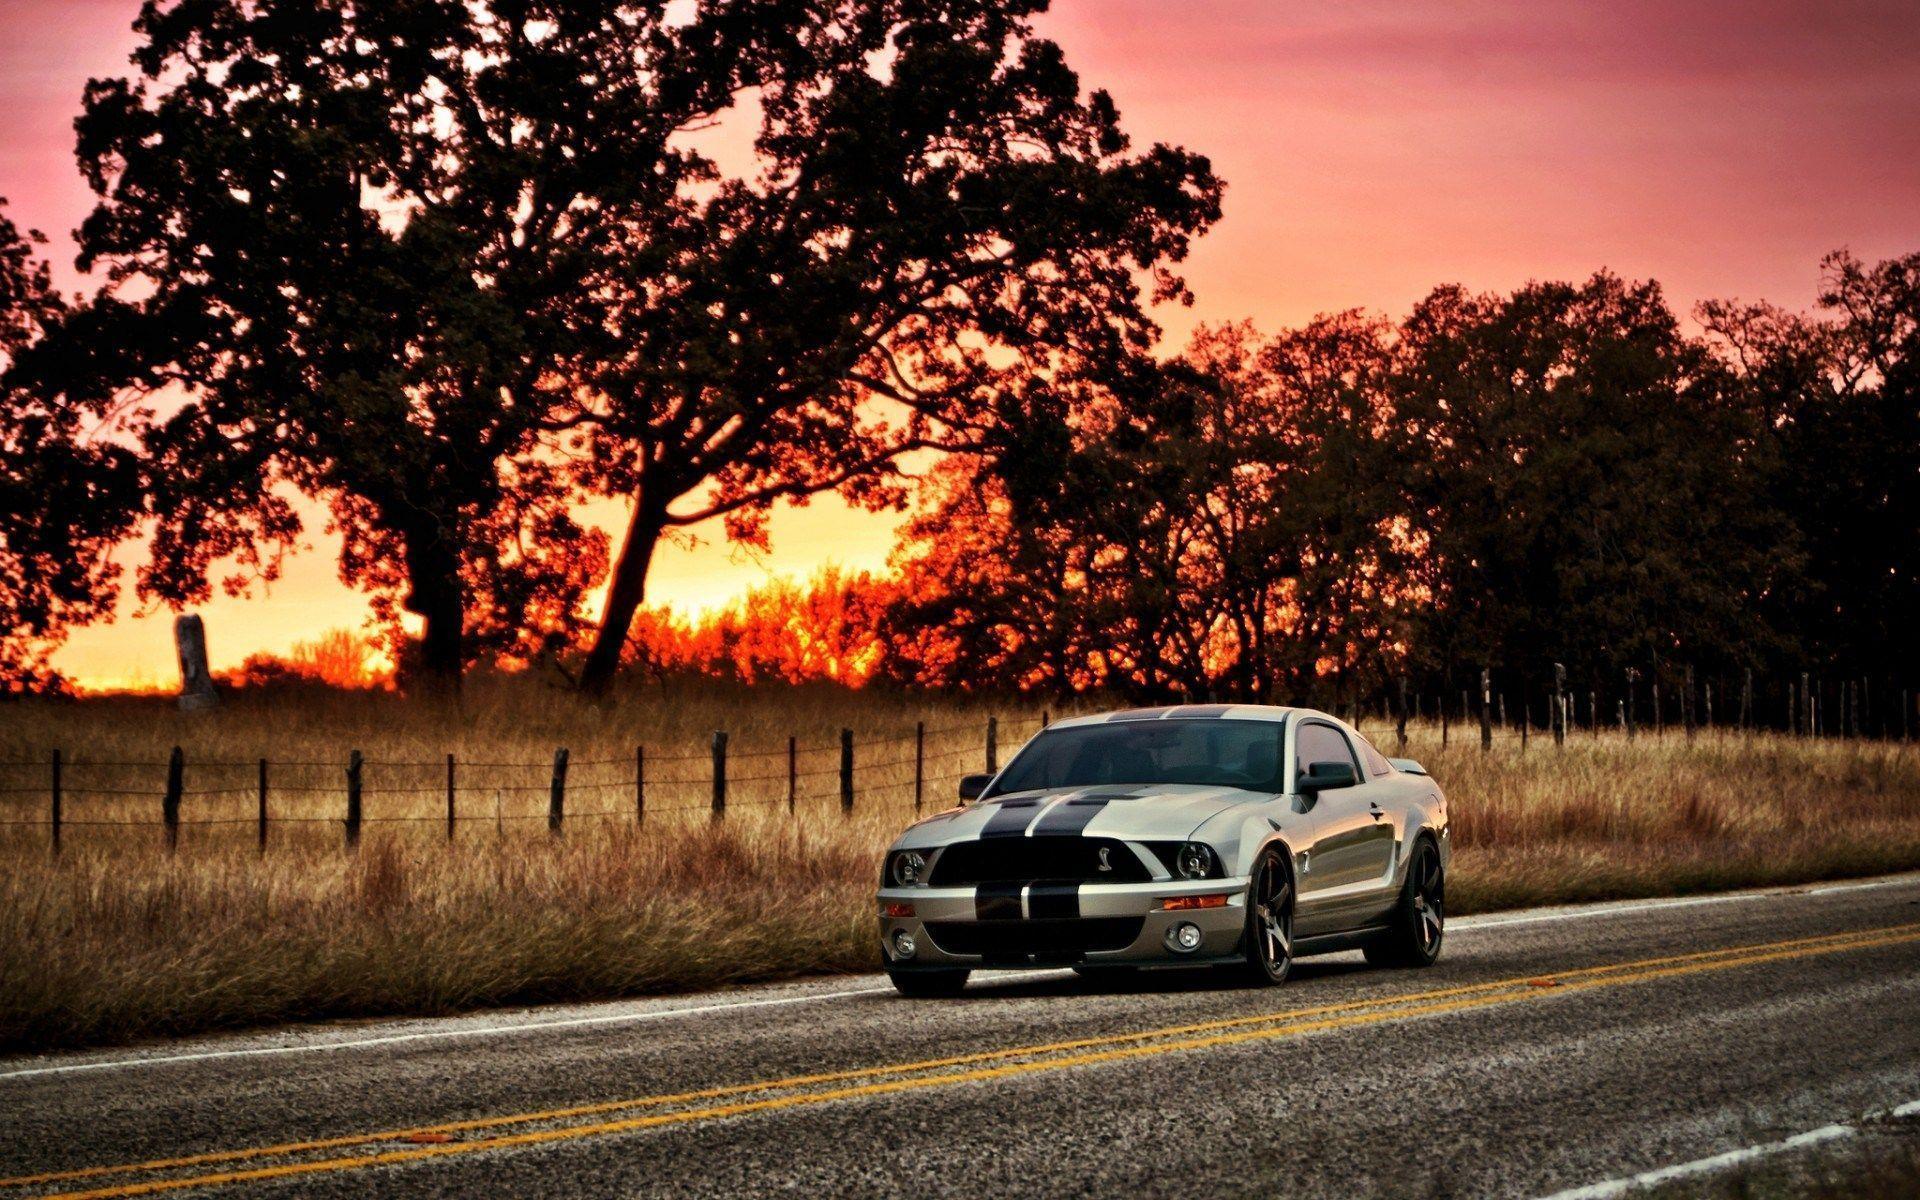 Ford Mustang Shelby Gt500 Wallpaper. Ford Mustang Shelby